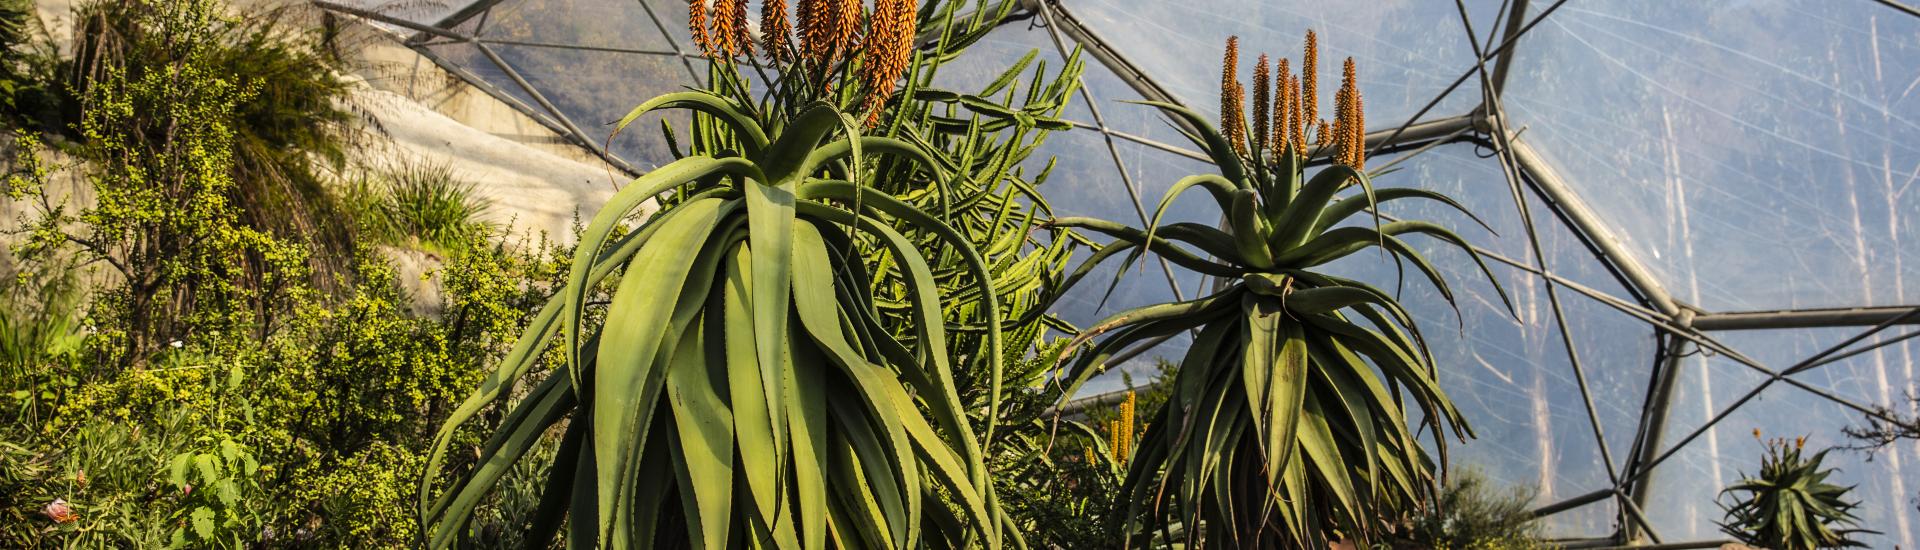 Aloes growing in the Mediterranean Biome